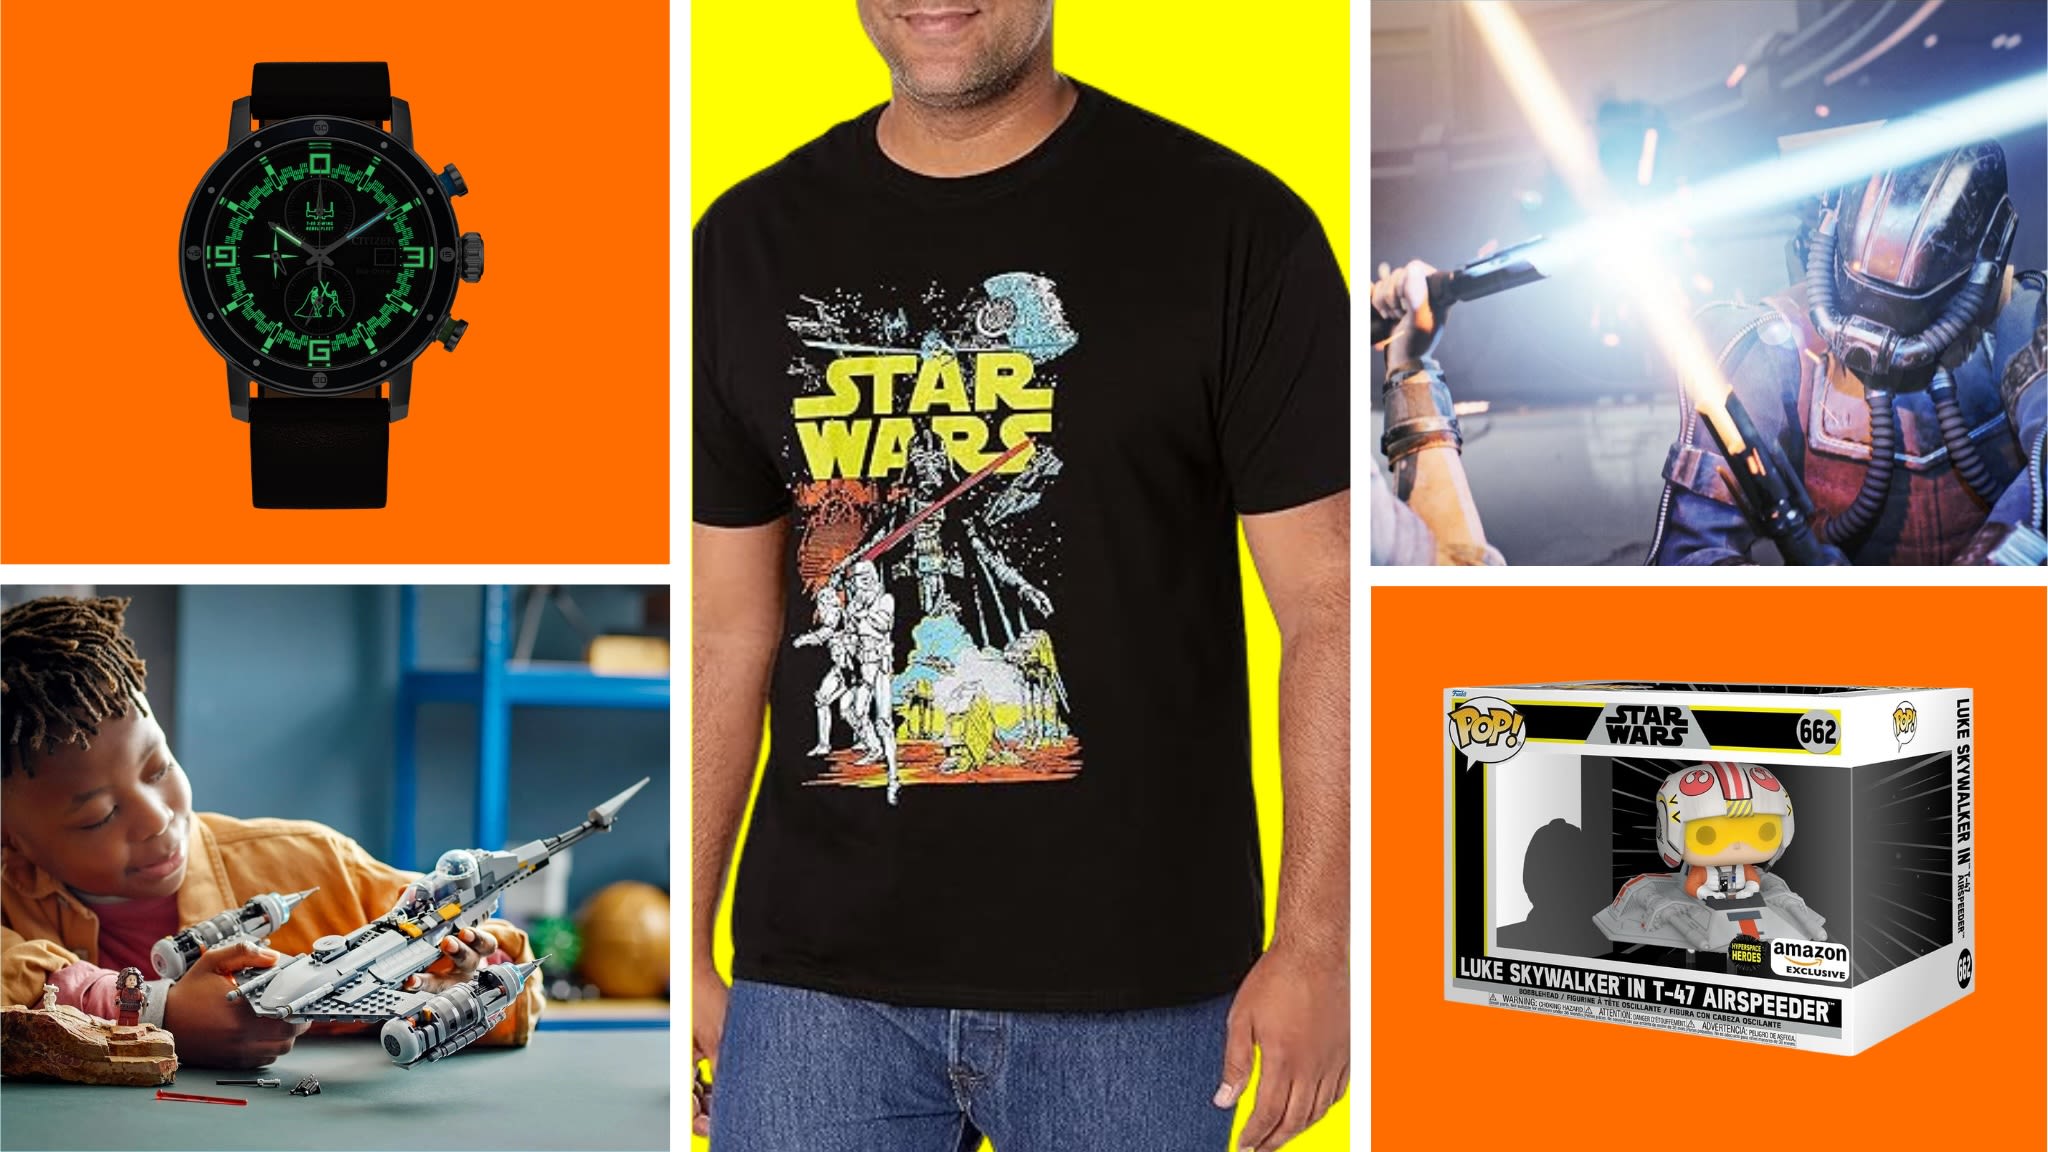 Star Wars Day deals: Save on apparel, accessories, and more this May the 4th